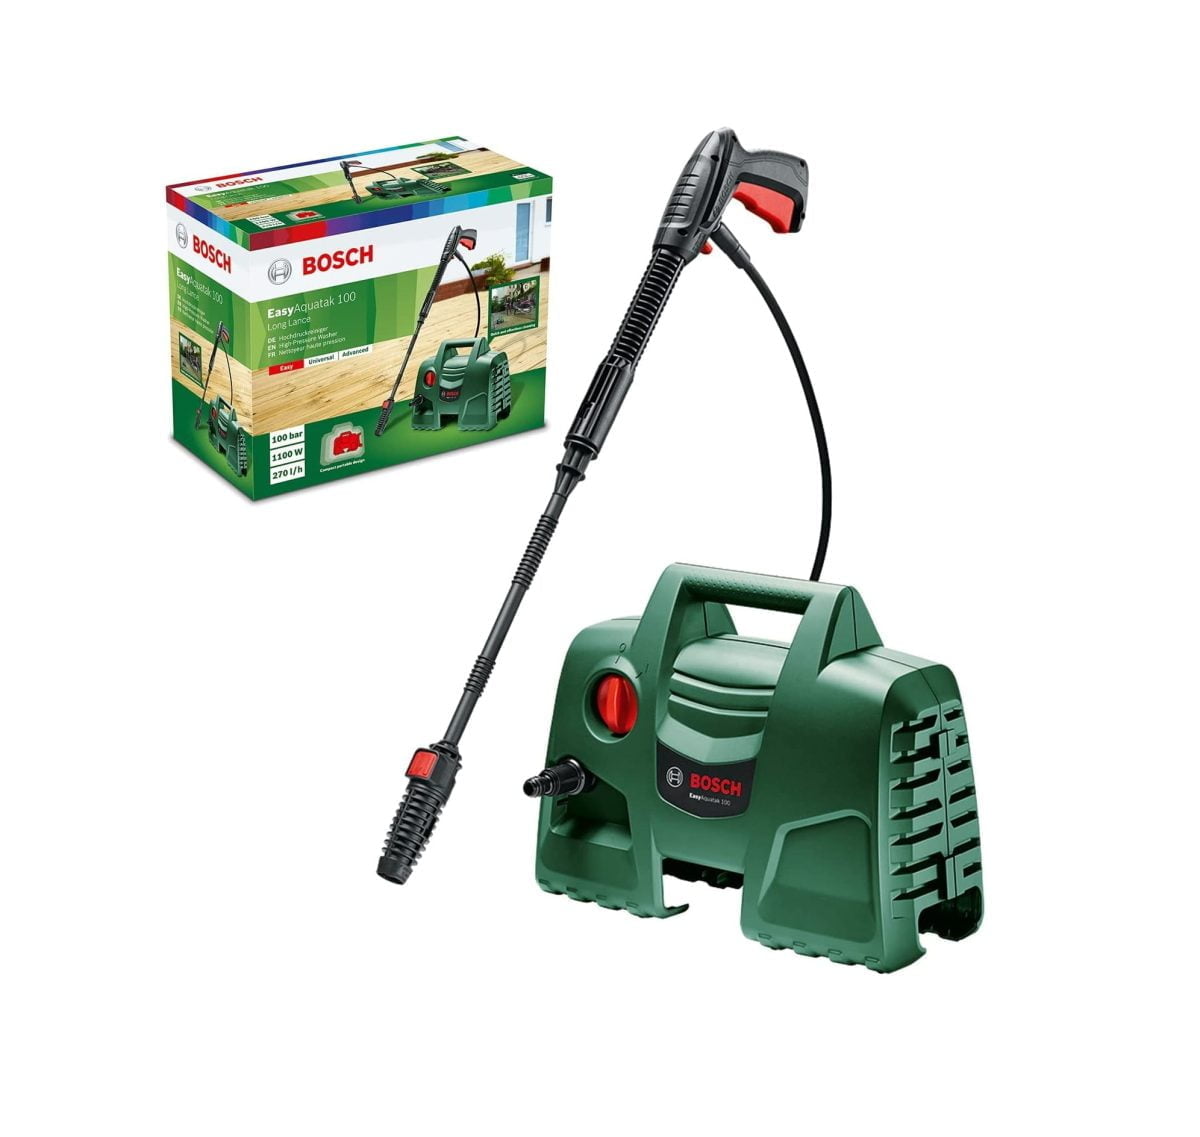 71Dgarxvvul. Ac Sl1500 Bosch &Lt;H1 Class=&Quot;Product-Title&Quot;&Gt;Bosch Easyaquatak 100 Long Lance Pressure Washer (1200 W) 100 Bar&Lt;/H1&Gt; &Lt;Div Class=&Quot;Col-Sm-6 Col-Md-12&Quot;&Gt; &Lt;Div Class=&Quot;O-Pthg-Productstage__Product-Summary H6&Quot;&Gt; &Lt;Div Class=&Quot;O-Pthg-Productstage__Product-Summary H6&Quot;&Gt;Compact And Quick For Effortless Cleaning Performance&Lt;/Div&Gt; &Lt;Ul Class=&Quot;A-List A-List--Unordered&Quot;&Gt; &Lt;Li Class=&Quot;A-List__Item&Quot;&Gt; &Lt;Div Class=&Quot;A-Text-Richtext&Quot;&Gt;Compact Design Allows Easy Maneuverability For Quick Cleaning Job&Lt;/Div&Gt;&Lt;/Li&Gt; &Lt;Li Class=&Quot;A-List__Item&Quot;&Gt; &Lt;Div Class=&Quot;A-Text-Richtext&Quot;&Gt;Adjustable Nozzle – From A Forceful Jet To Gentle Rinsing&Lt;/Div&Gt;&Lt;/Li&Gt; &Lt;Li Class=&Quot;A-List__Item&Quot;&Gt; &Lt;Div Class=&Quot;A-Text-Richtext&Quot;&Gt;Push-Fit Connections For Ultimate Convenience&Lt;/Div&Gt;&Lt;/Li&Gt; &Lt;Li Class=&Quot;A-List__Item&Quot;&Gt; &Lt;Div Class=&Quot;A-Text-Richtext&Quot;&Gt;Easily Tackle Small-To-Medium-Sized Cleaning Tasks&Lt;/Div&Gt;&Lt;/Li&Gt; &Lt;/Ul&Gt; Model 00600 8A7 E71 Is &Lt;/Div&Gt; &Lt;/Div&Gt; Bosch Easyaquatak 100 Long Lance Pressure Washer (1200 W) 100 Bar